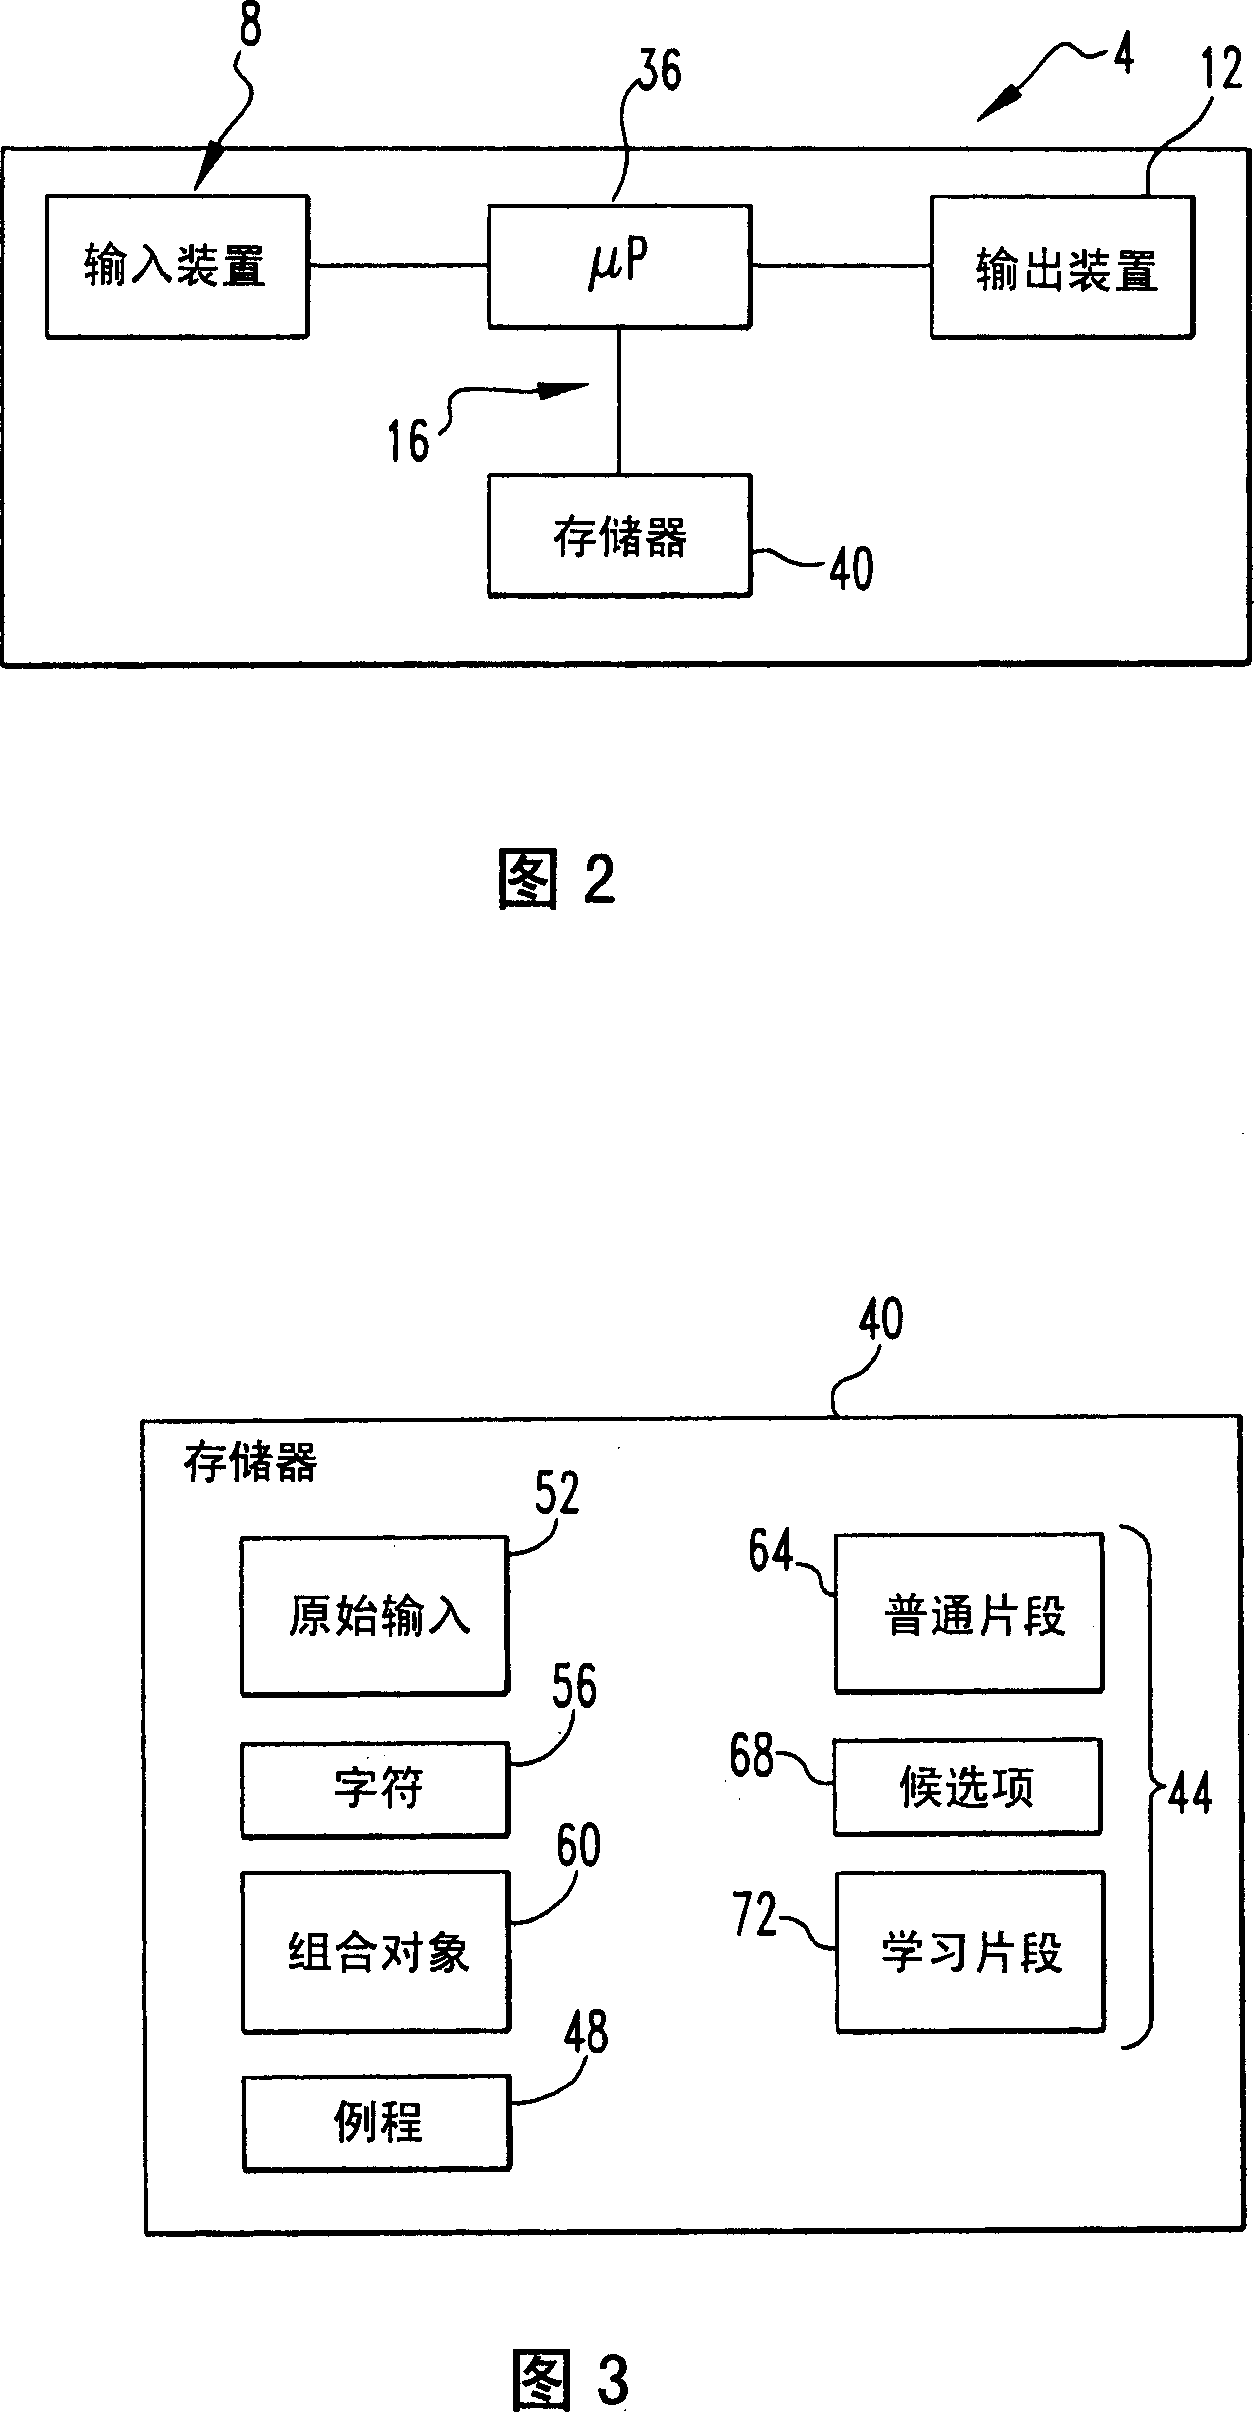 Method for learning character fragments from received text and relevant hand-hold electronic equipments